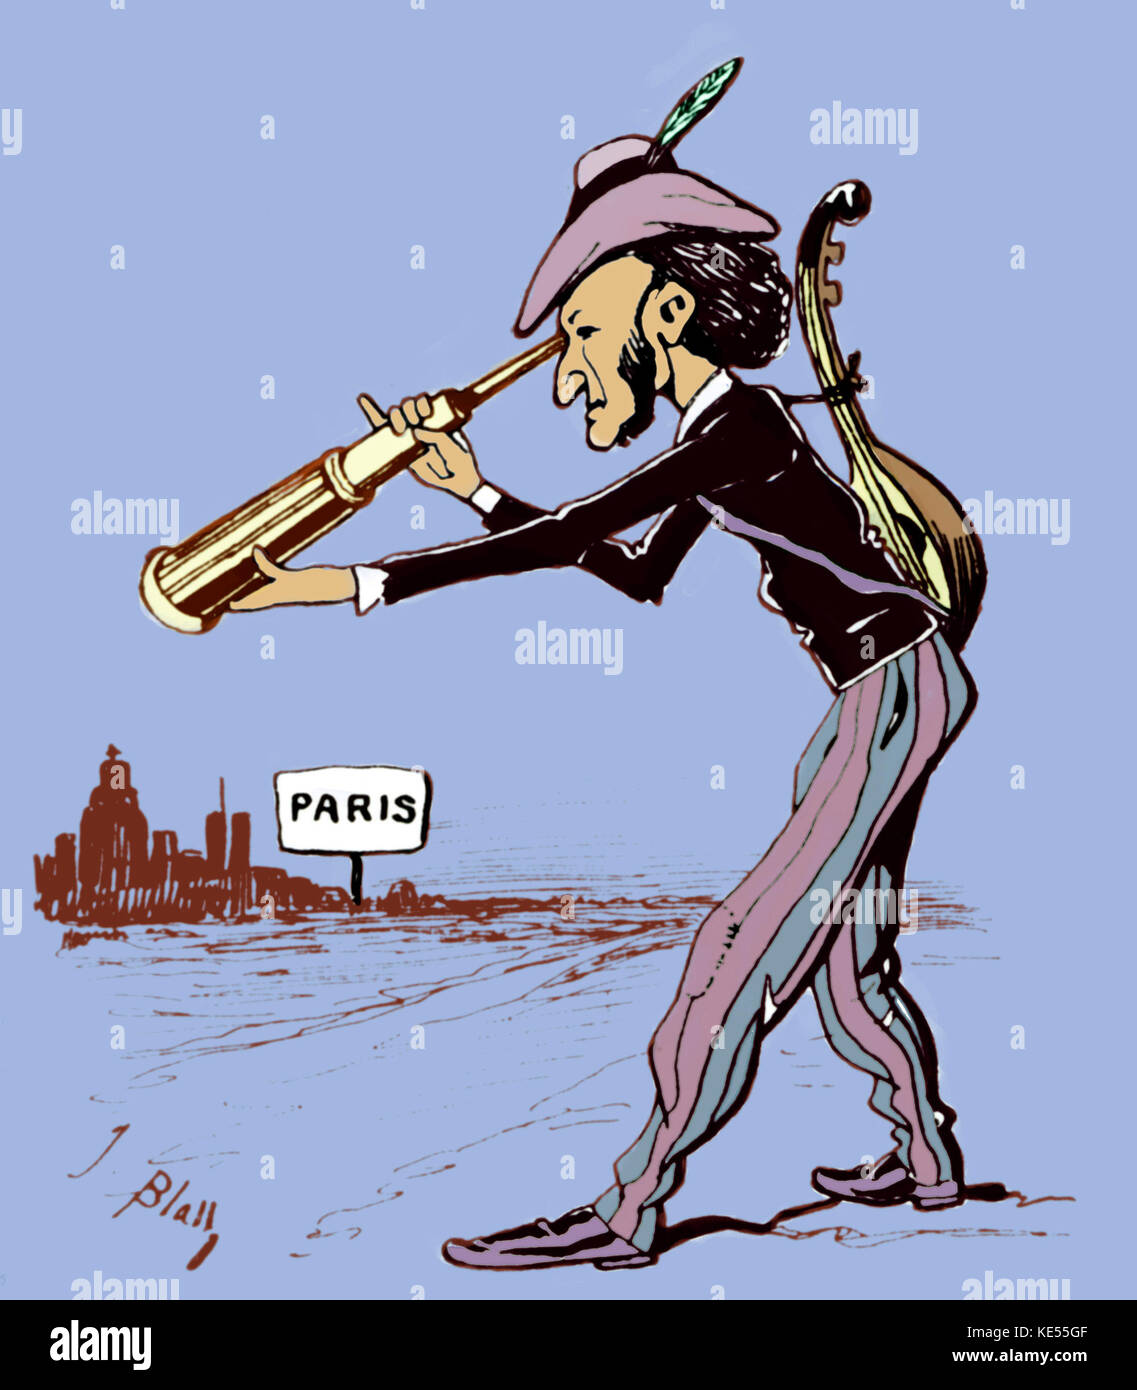 WAGNER, Richard  -  on his way to Paris, searching the right path. Caricature German composer and author (1813-1883). Colourised version. Stock Photo